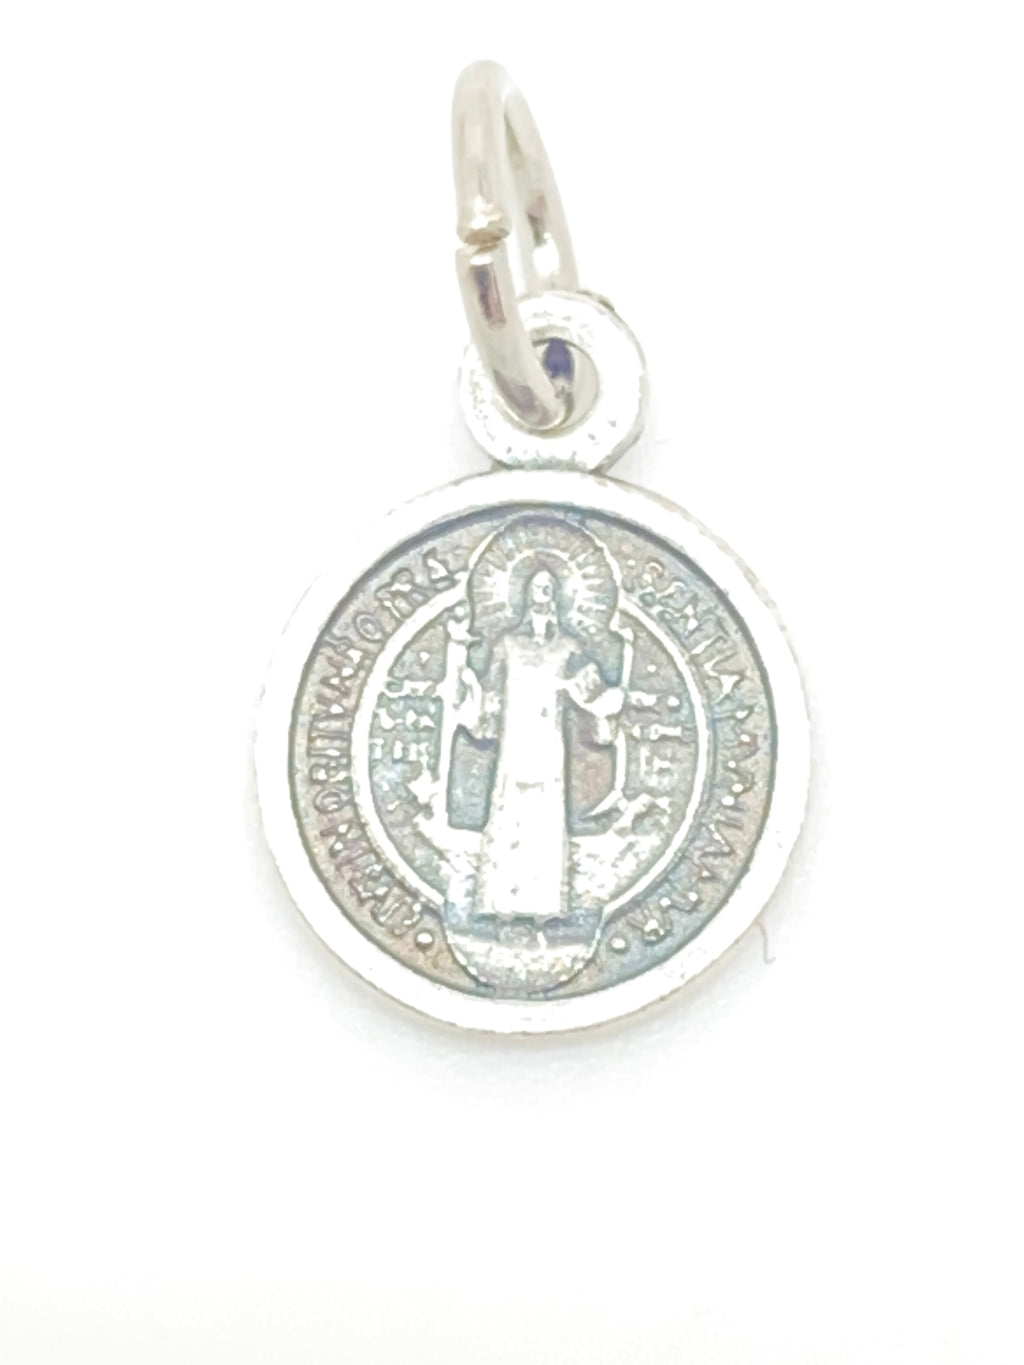 Italian Made and Imported Benedict Medal Charm Size 1/2" - Unique Catholic Gifts